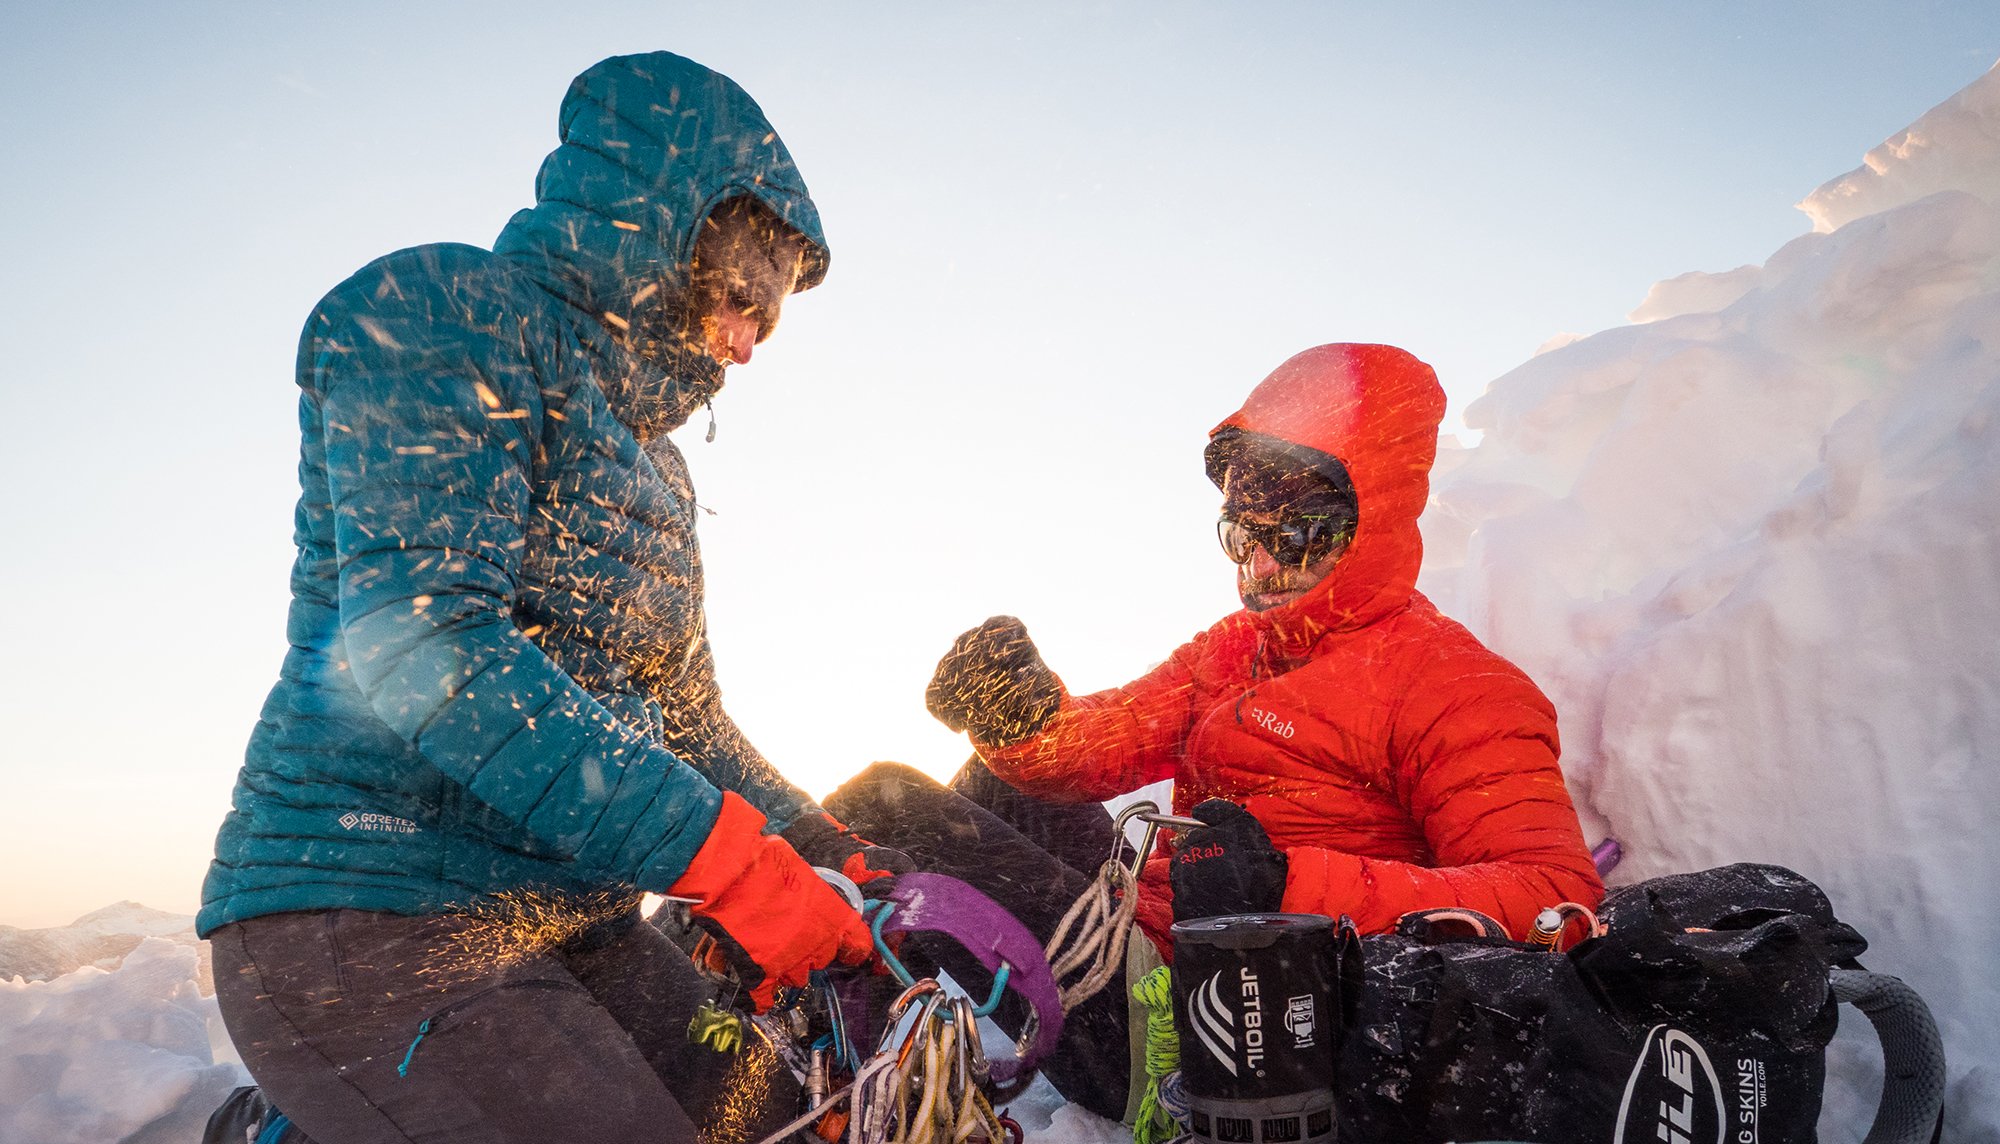 How to wash and care for your down jacket or sleeping bag